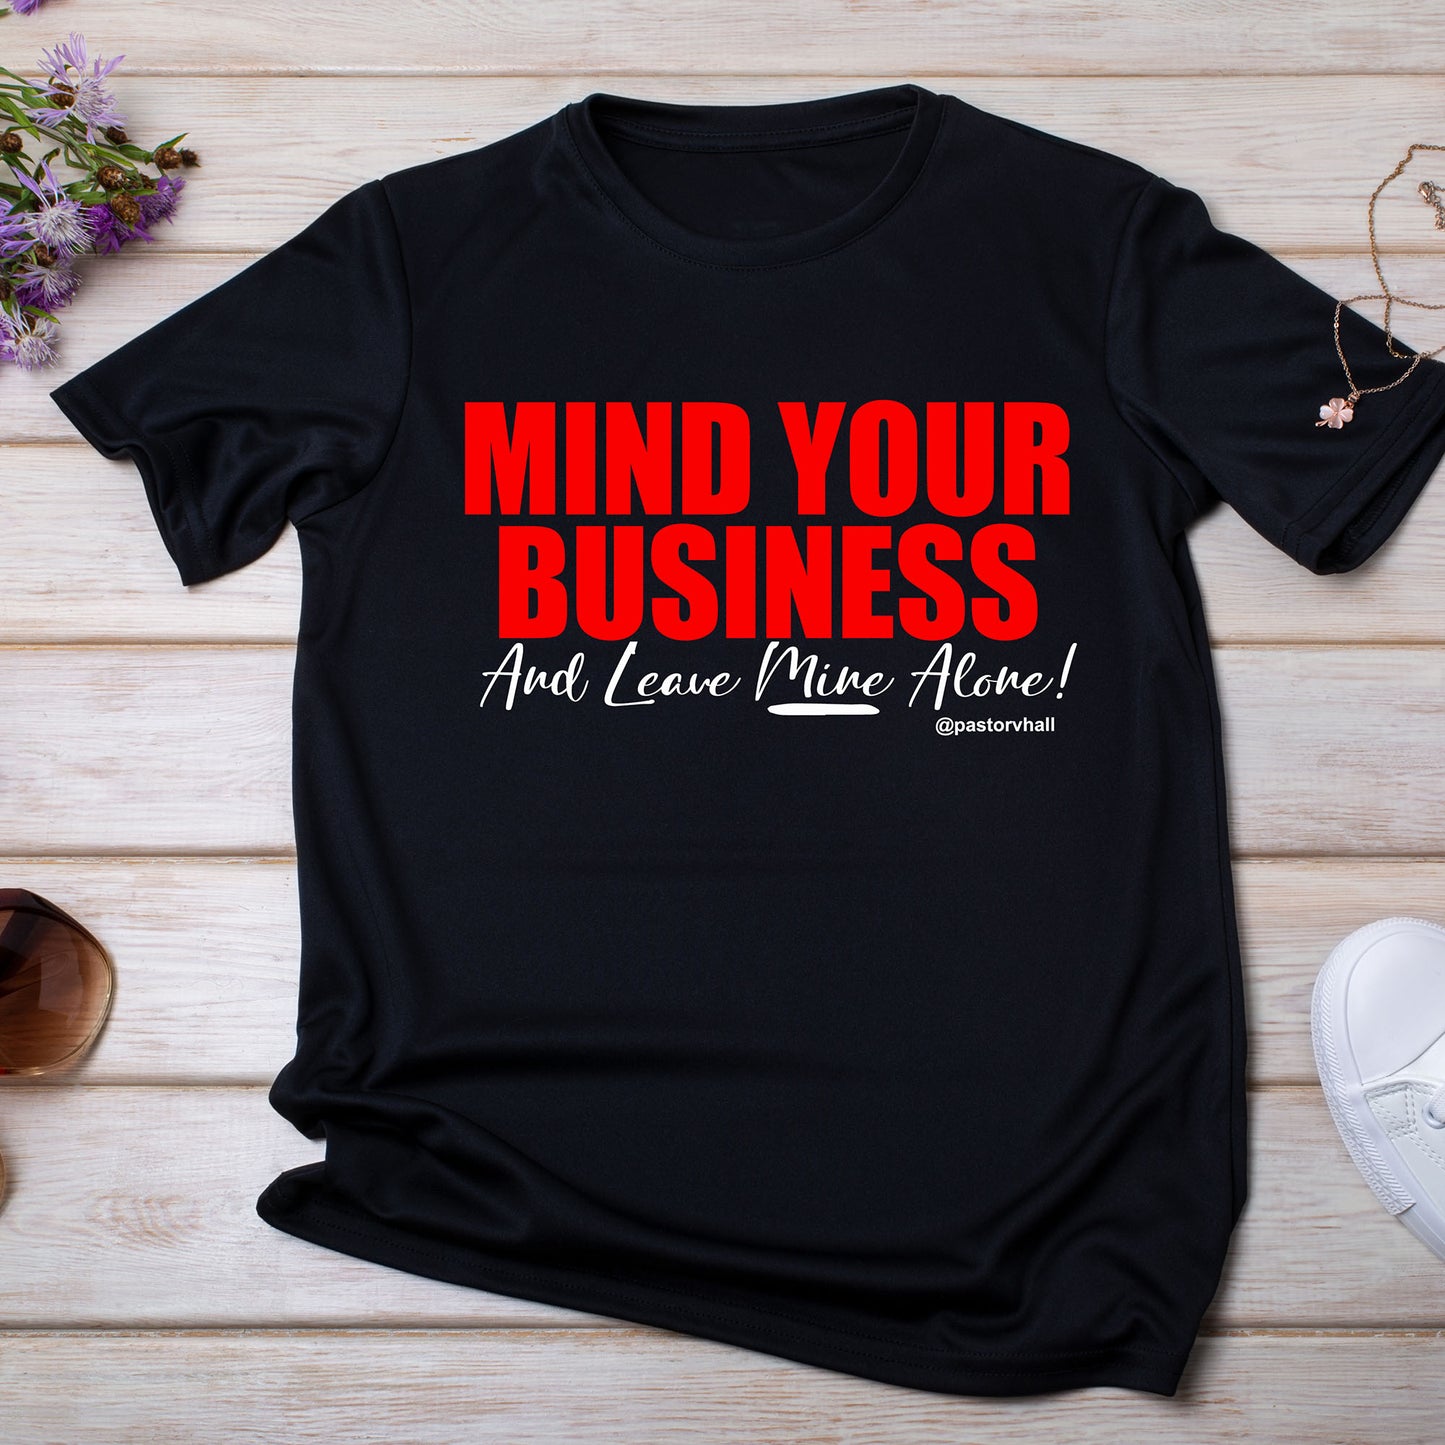 VRH-Mind Your Business Tee - Black w/ RED AND WHITE